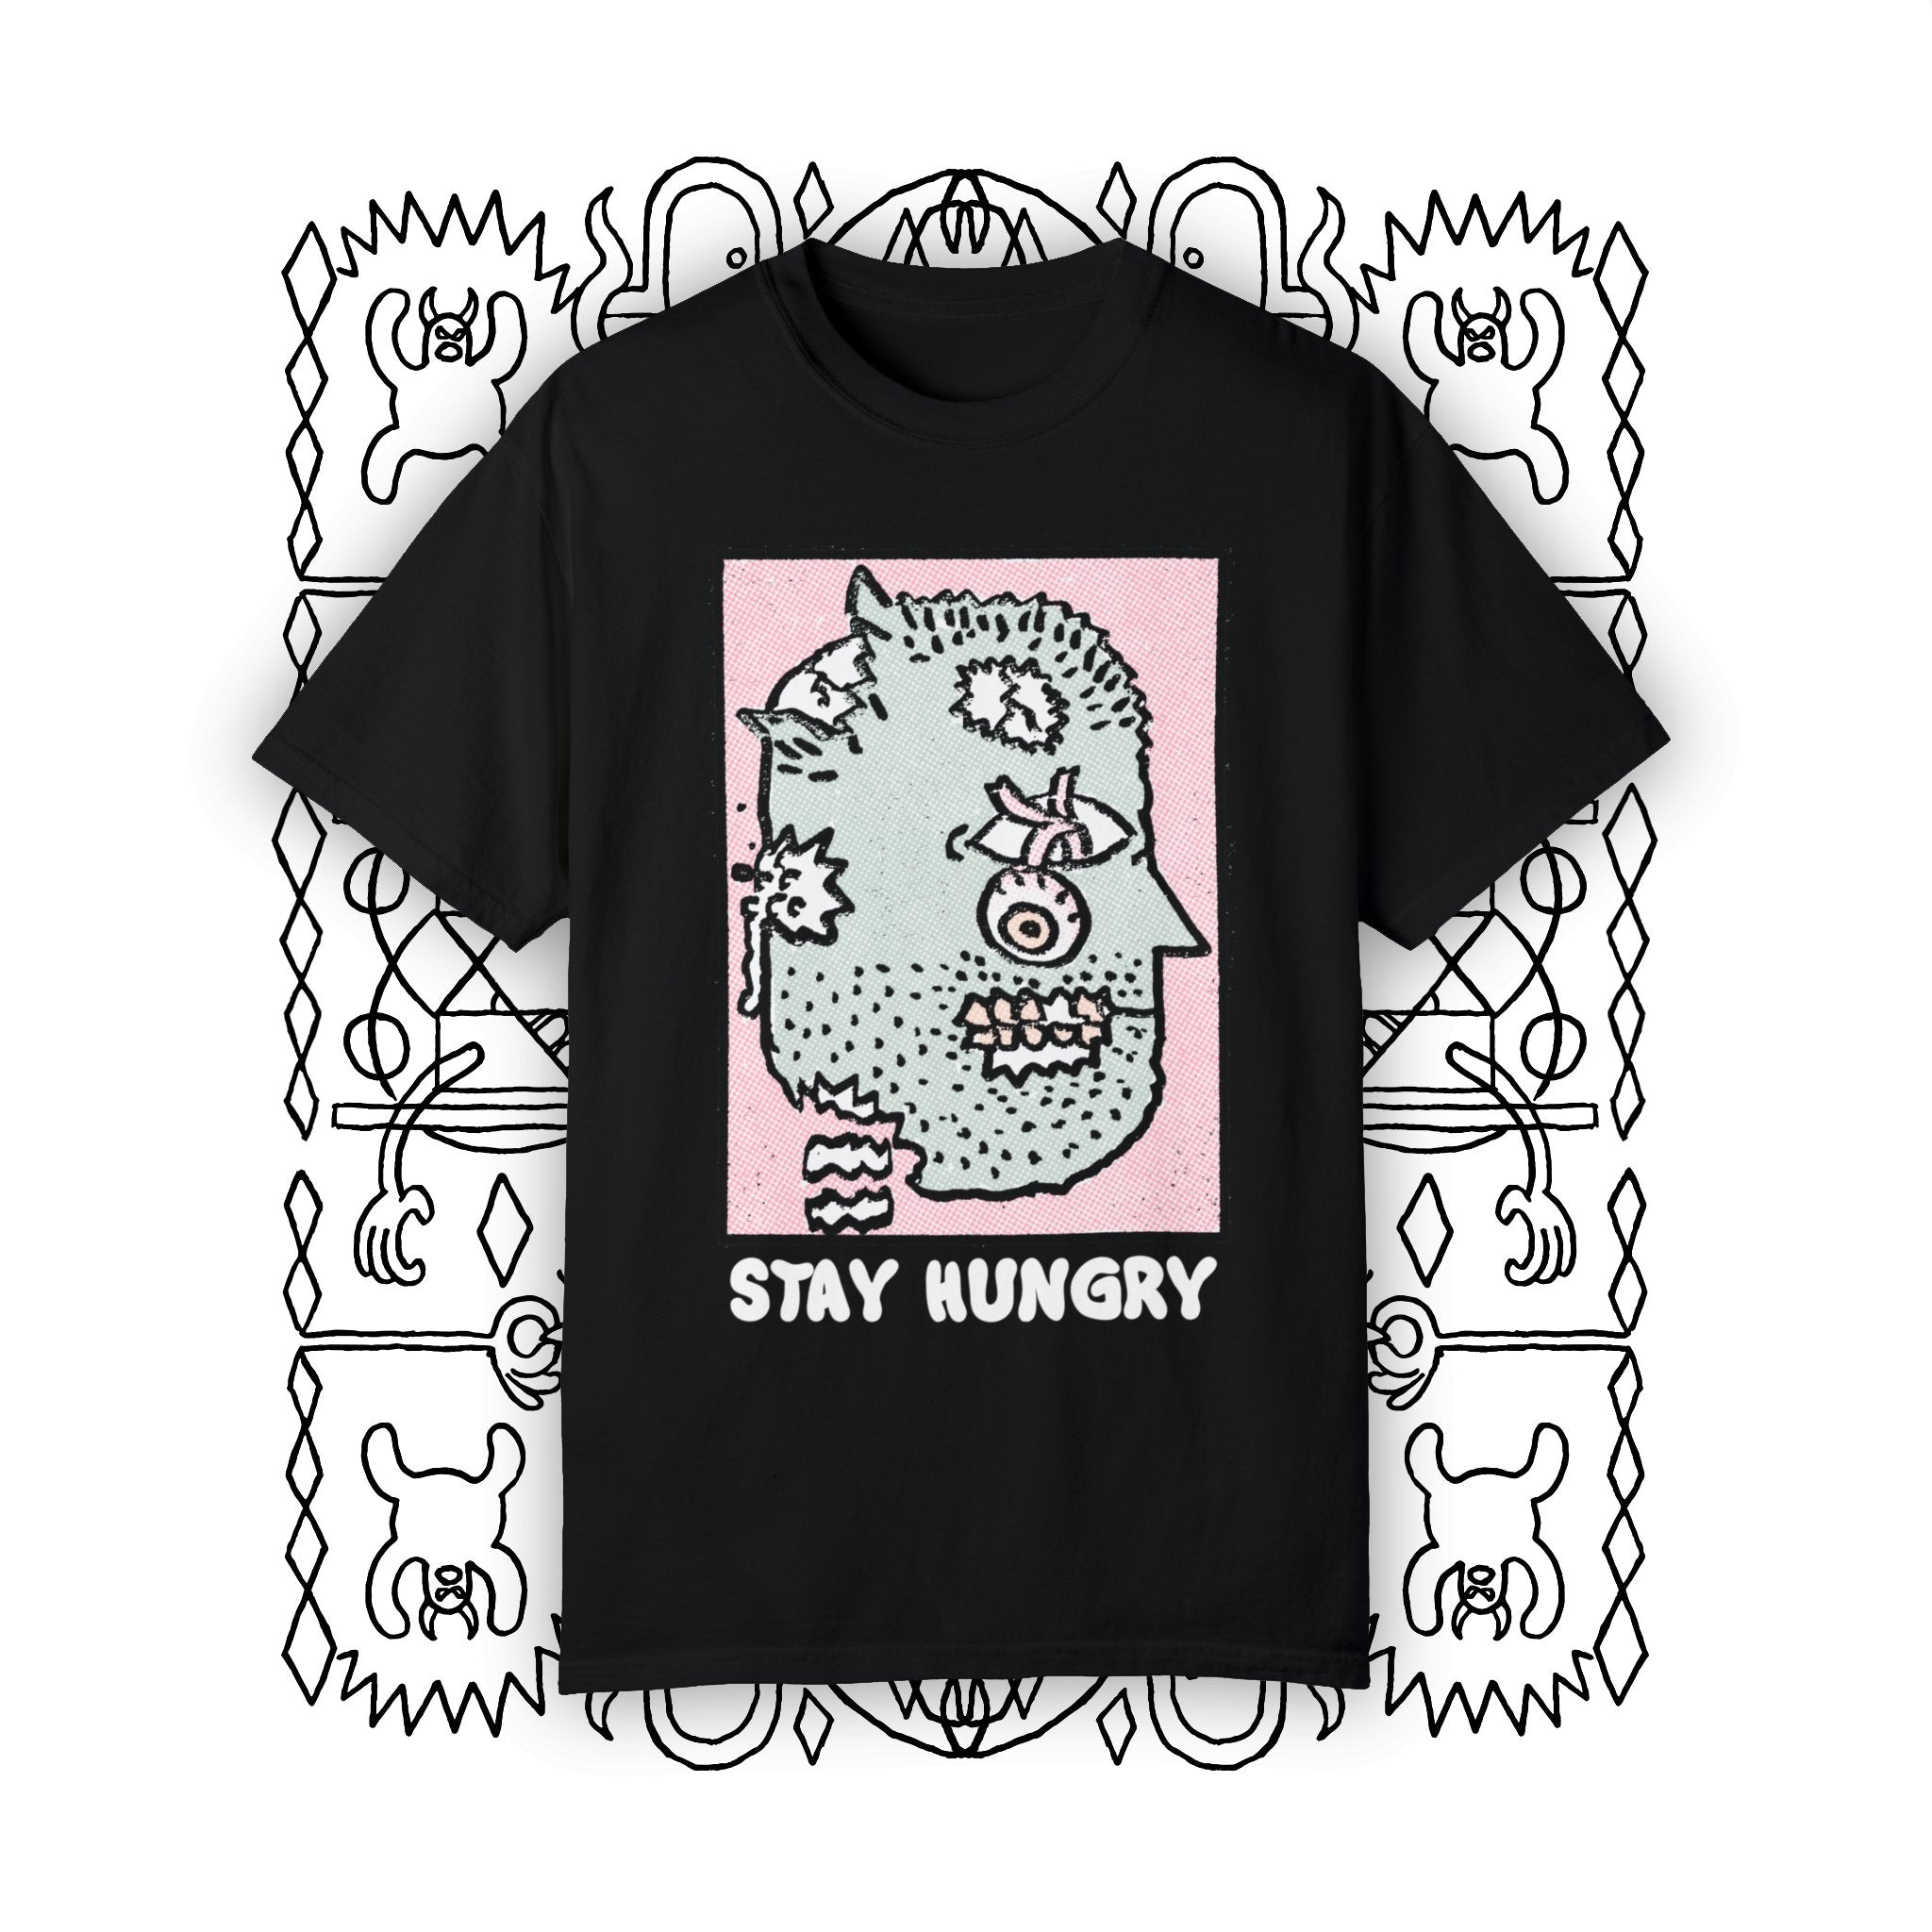 Stay Hungry | Comfort Colors Premium T-shirt - T-Shirt - Ace of Gnomes - 21604968535233729512